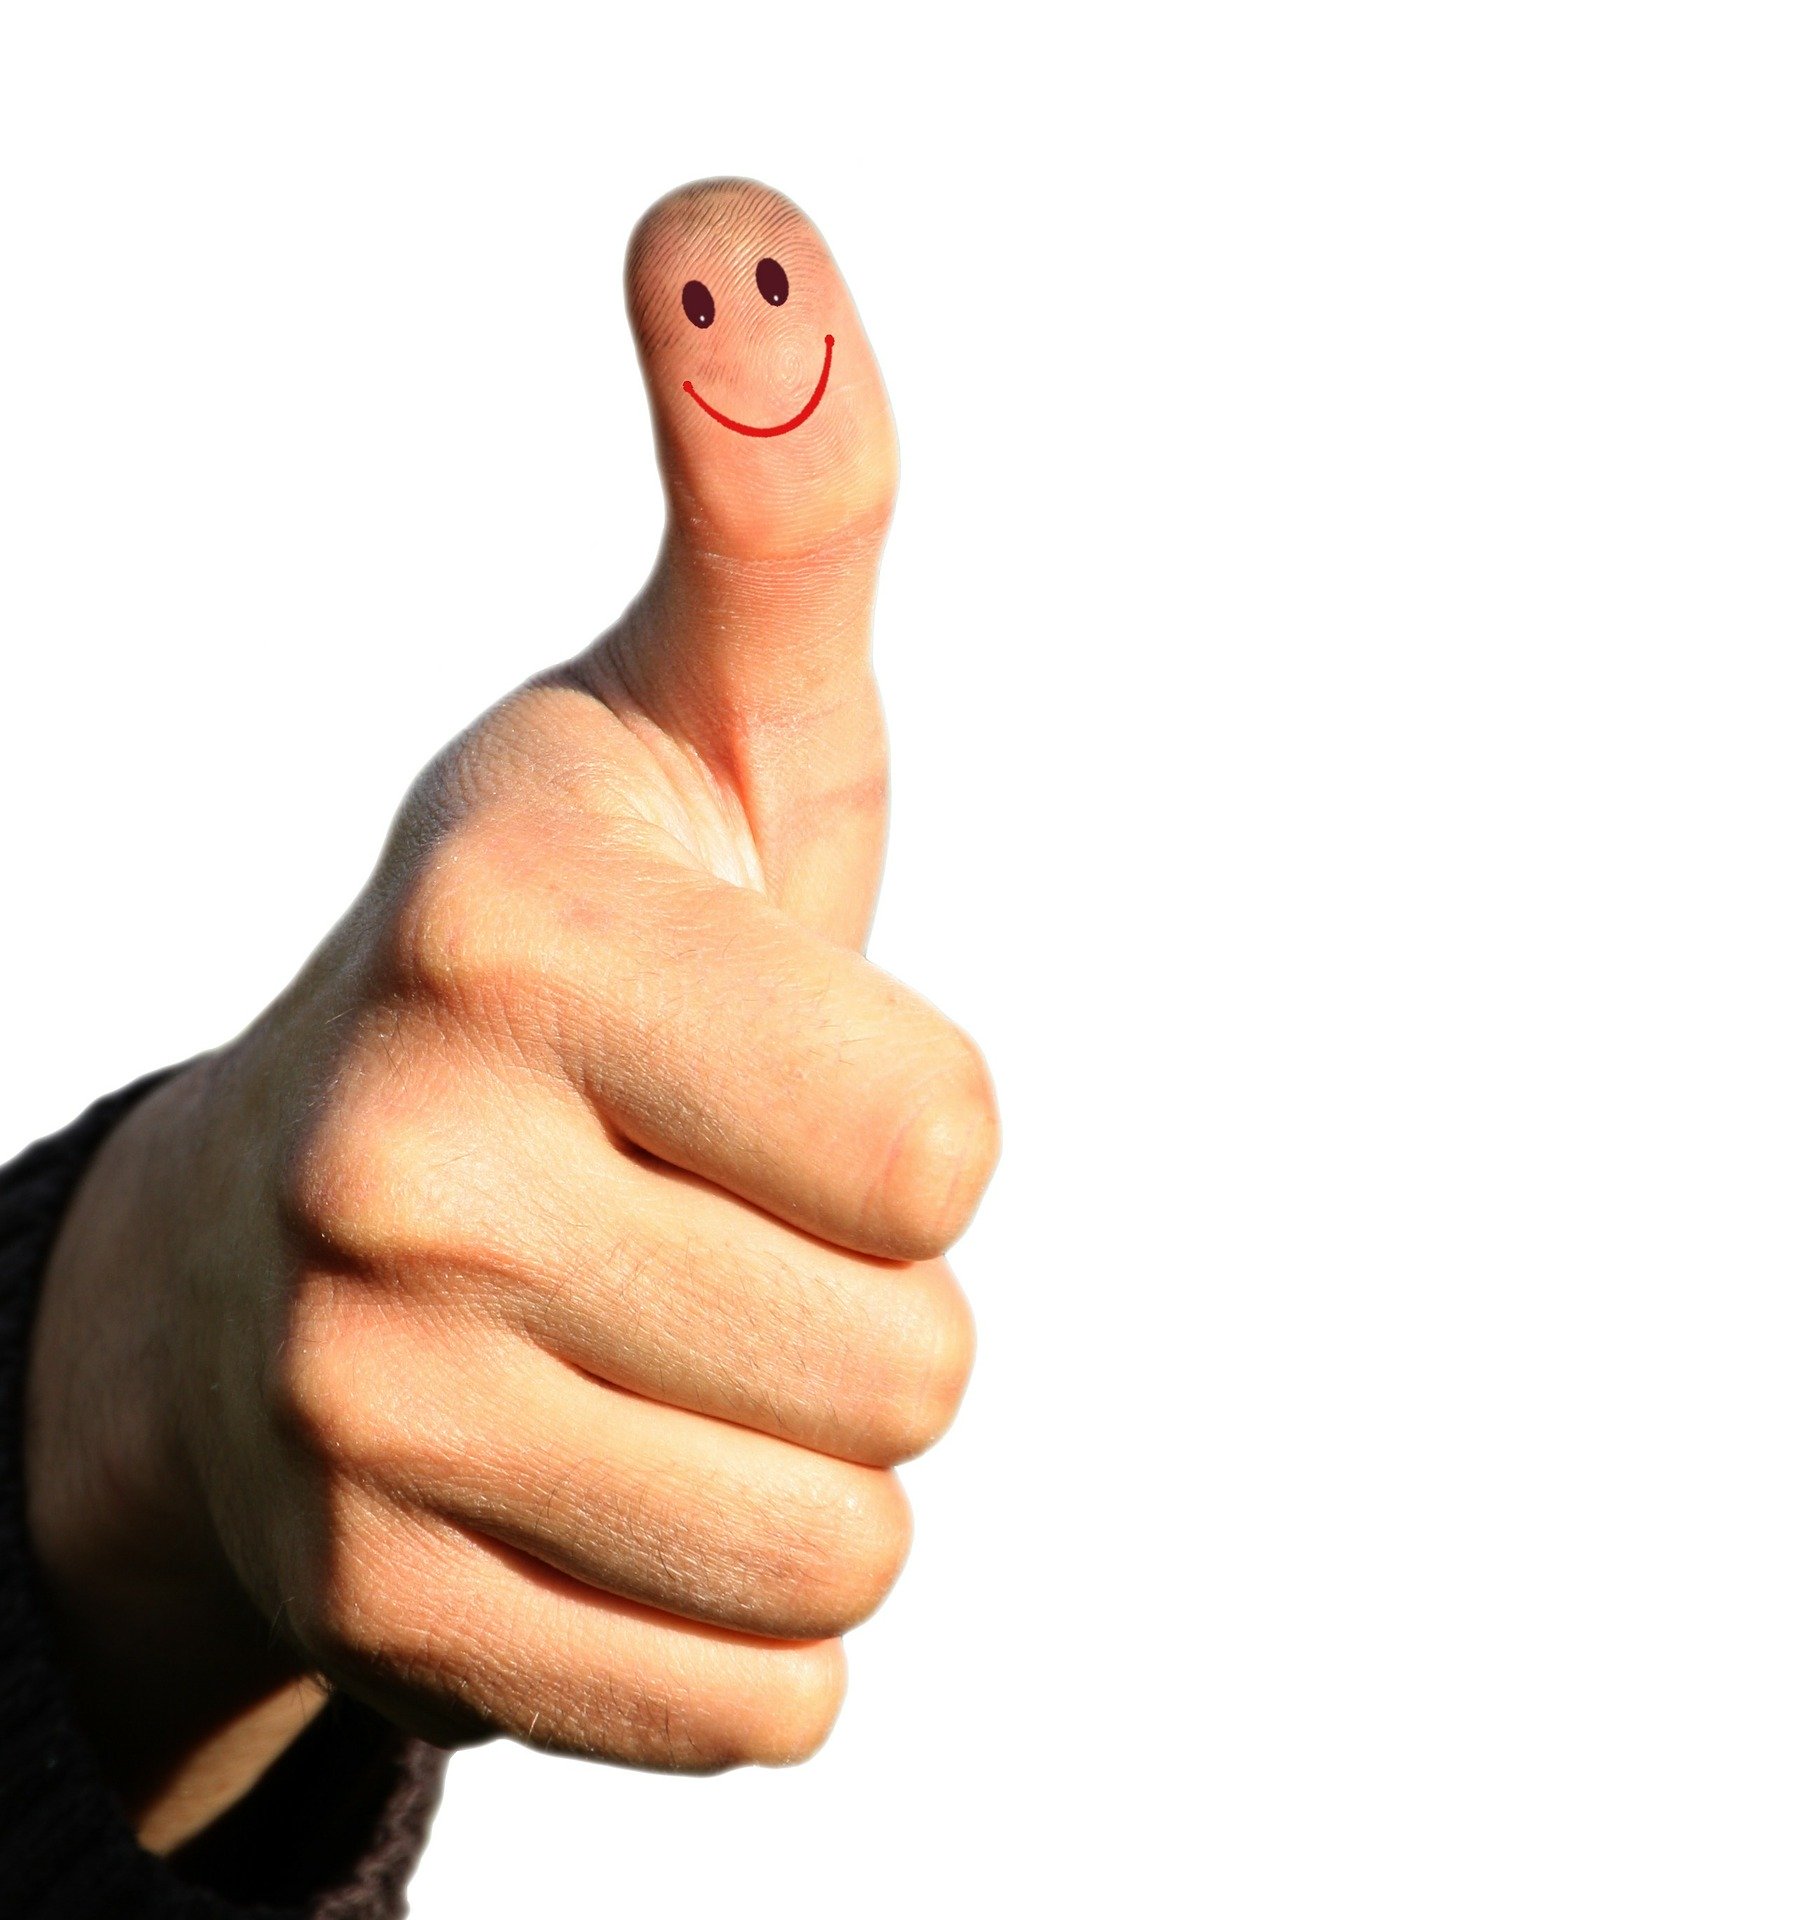 An Image of a smiley thumbs up